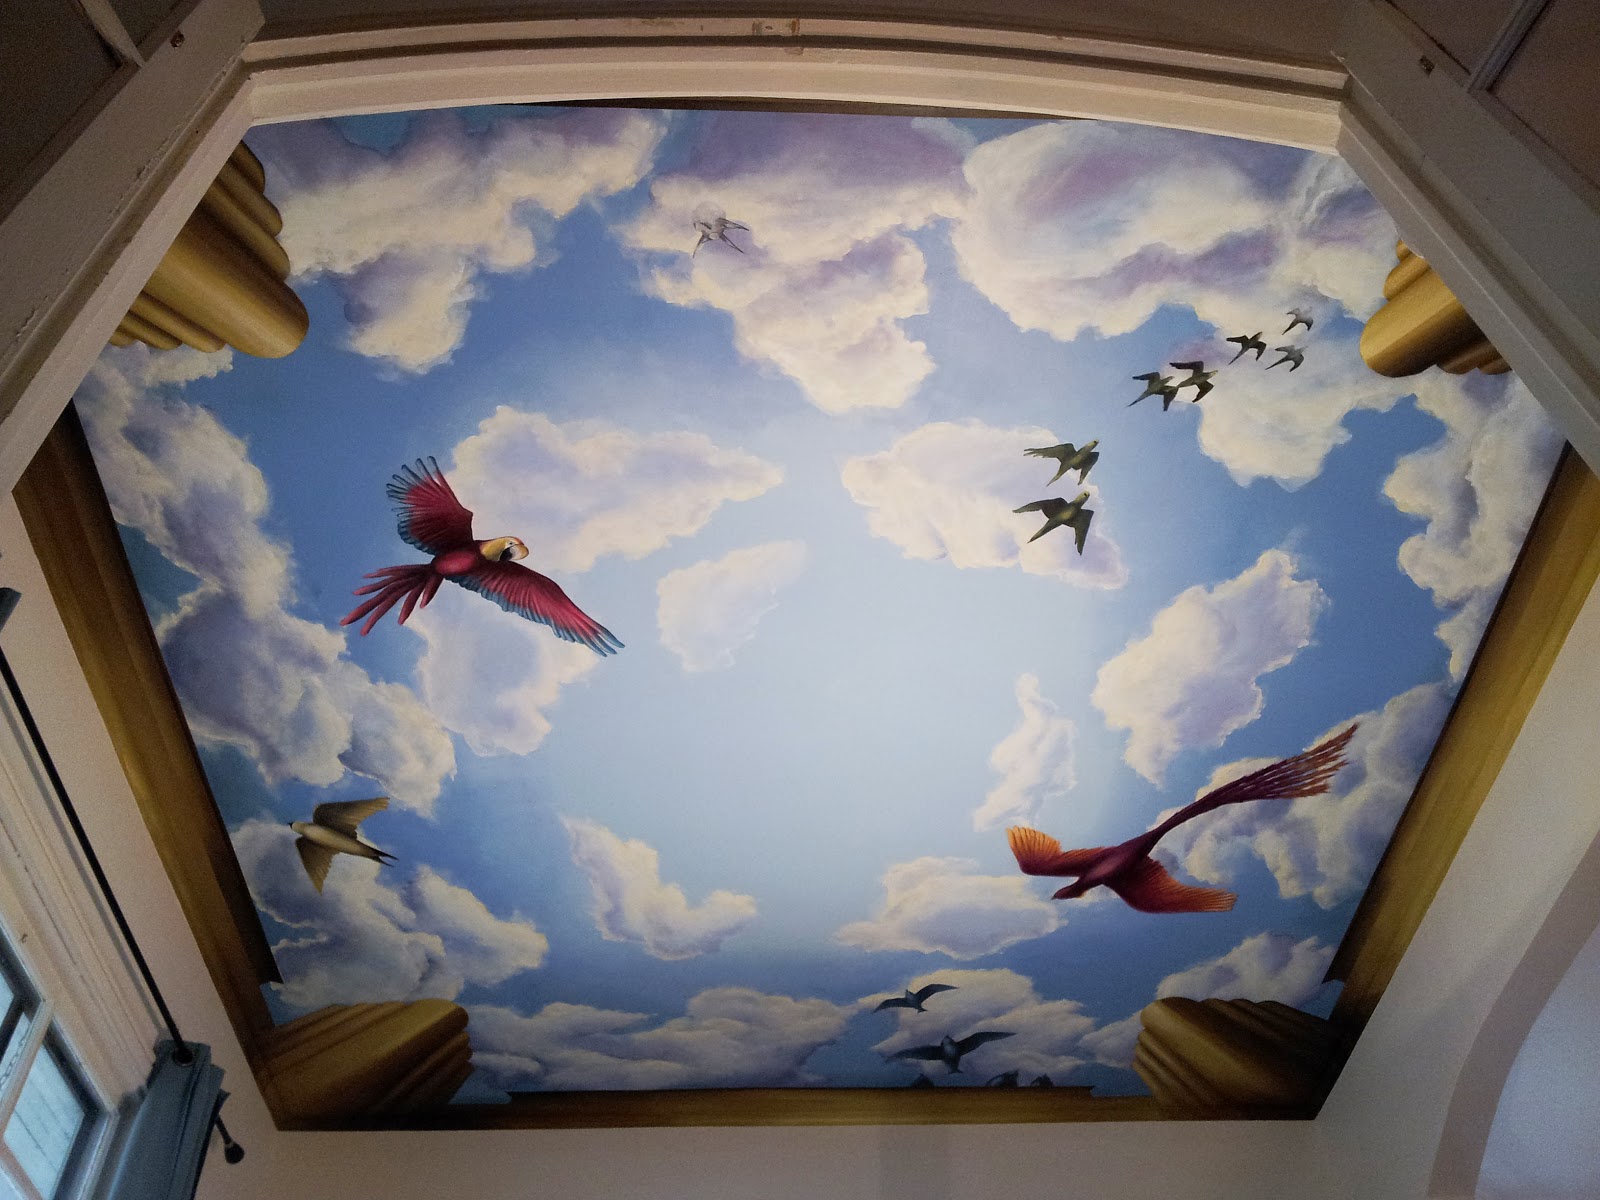 Star Murals Ceiling Mural With Birds Chicago Il